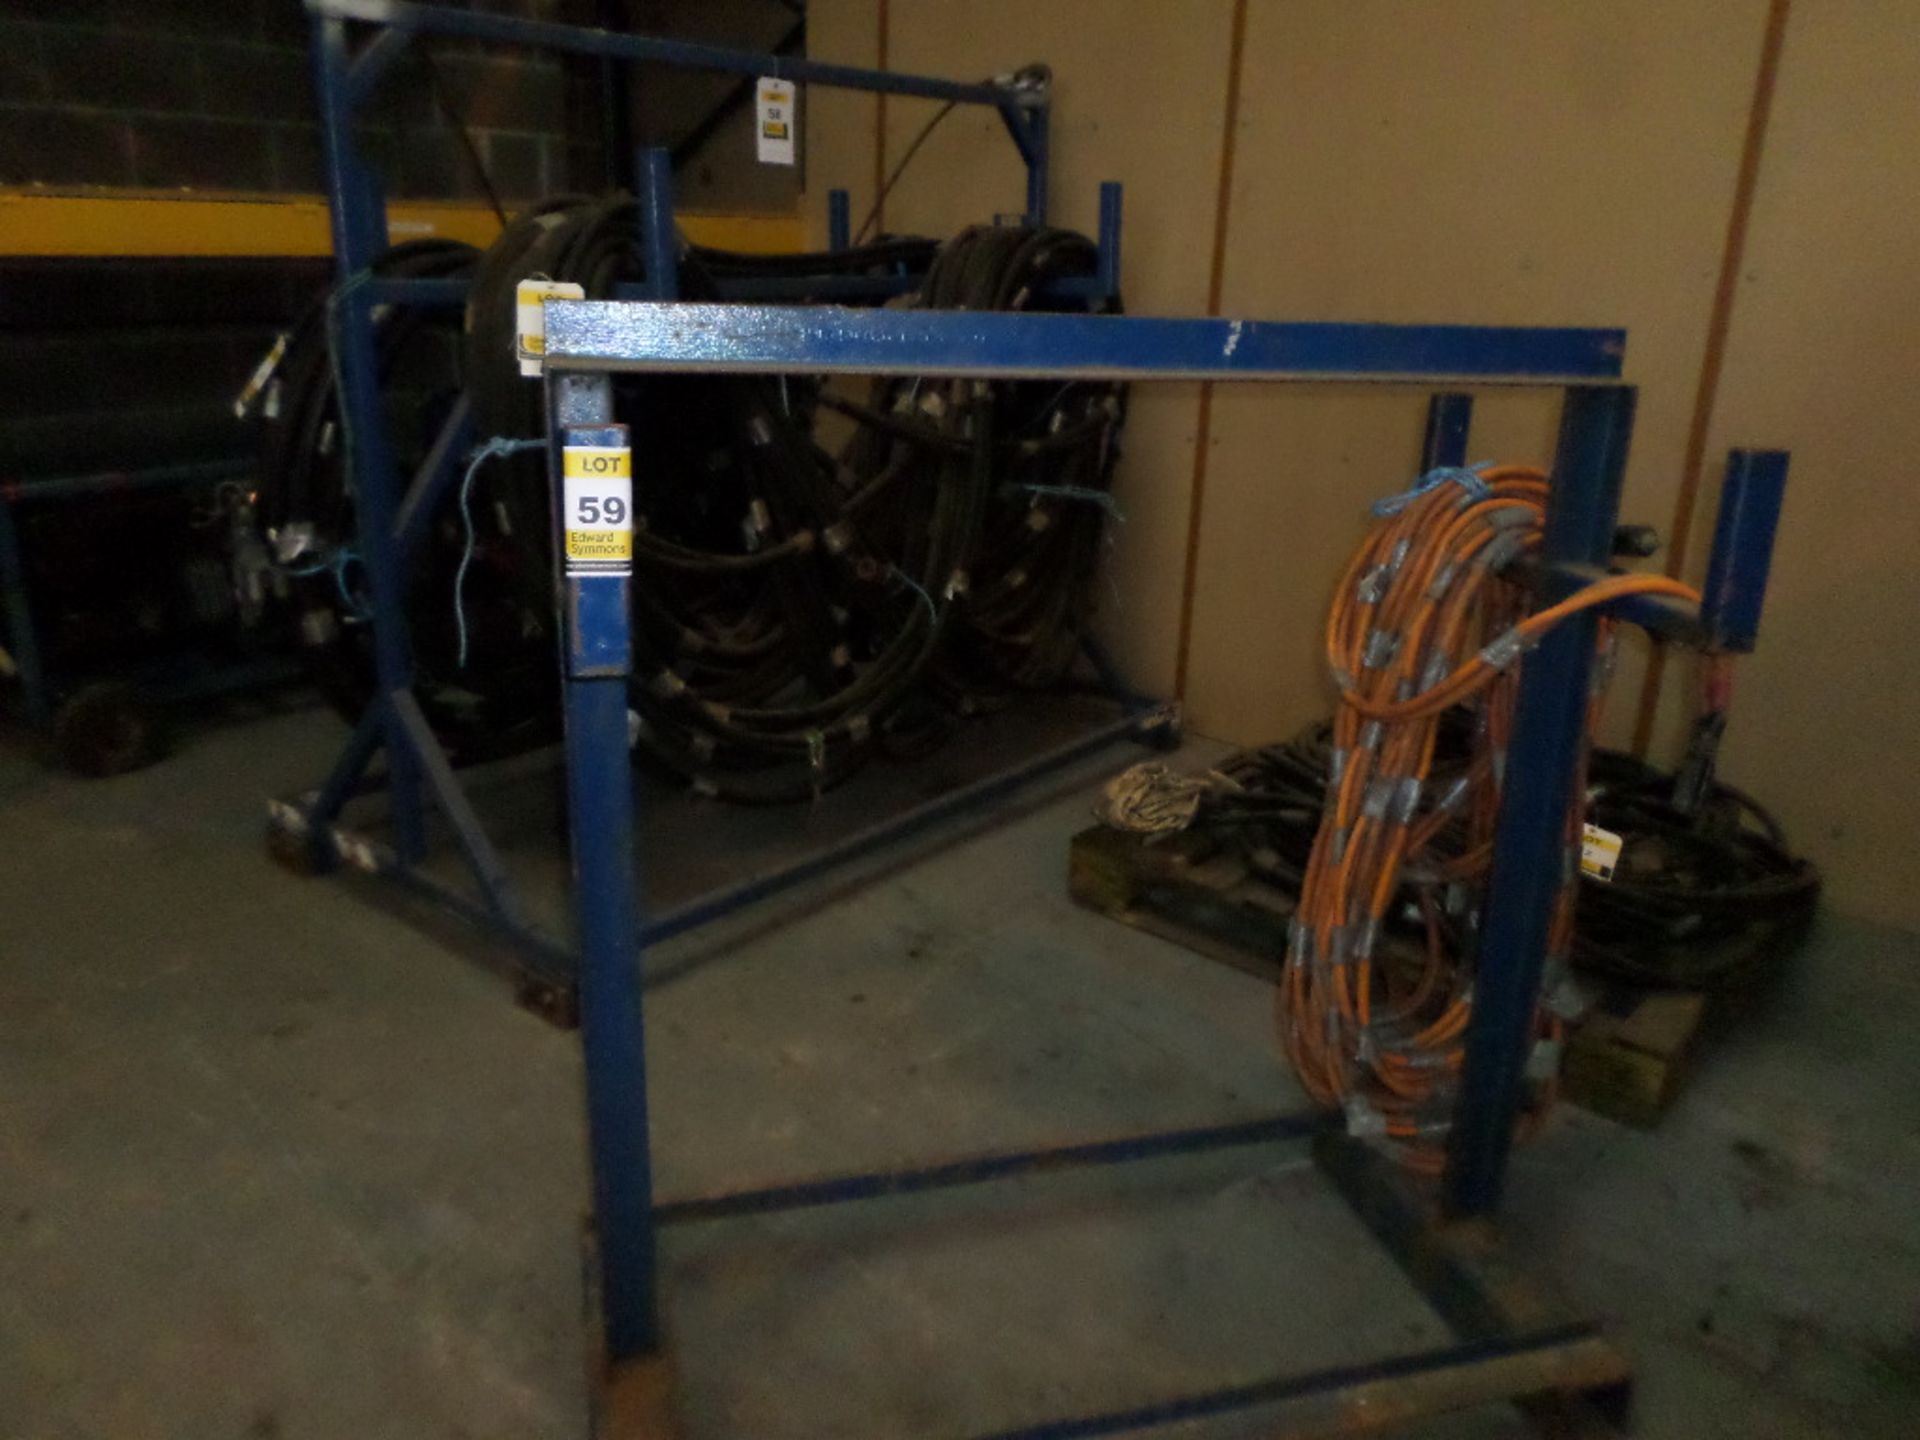 Steel fabricated small umbilical storage stand (Please note that this lot does not have a current